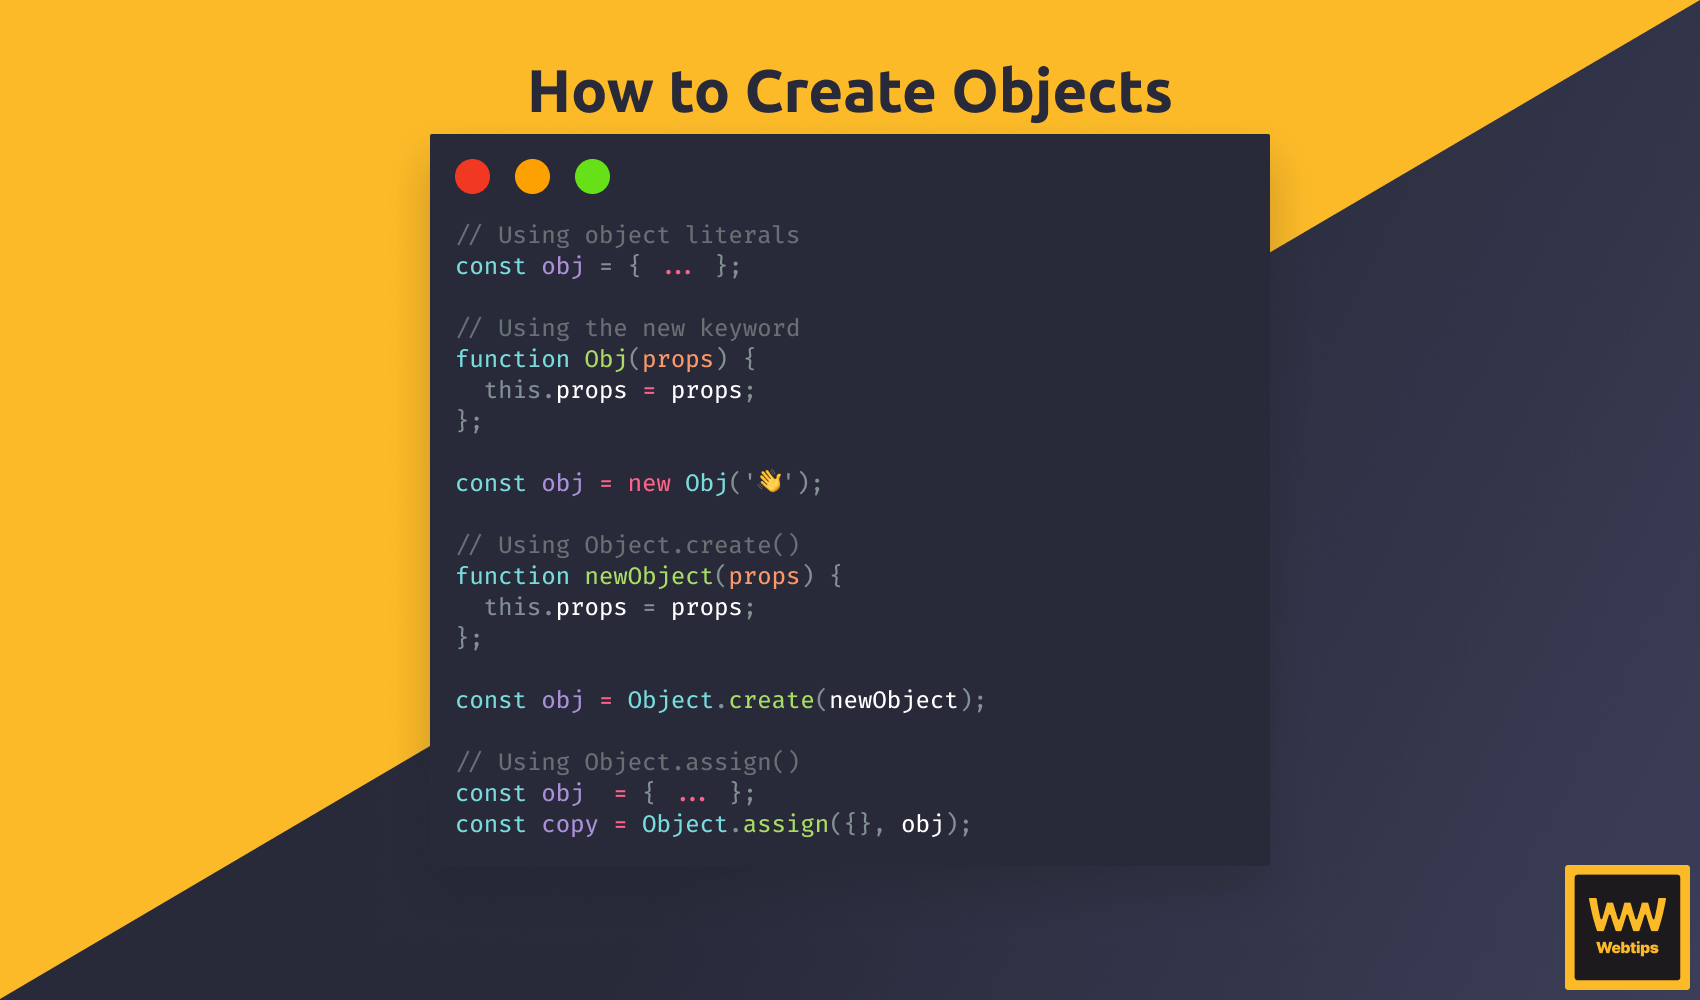 How to Create Objects in JavaScript